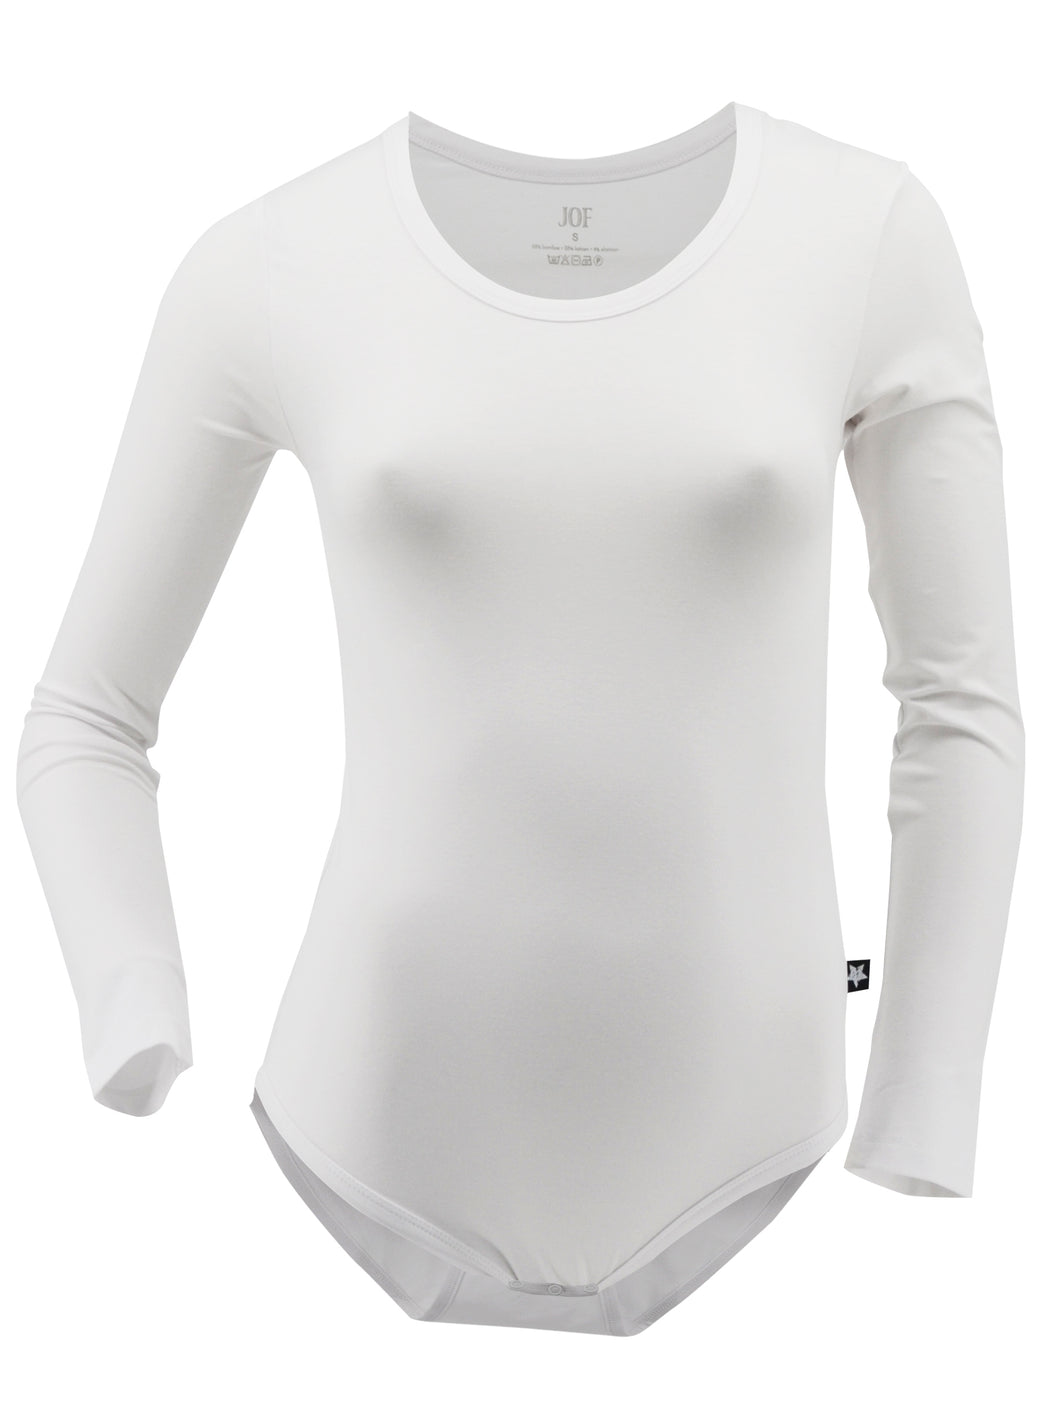 Long-sleeved body - wide neck -𝗢𝘀𝗹𝗼-